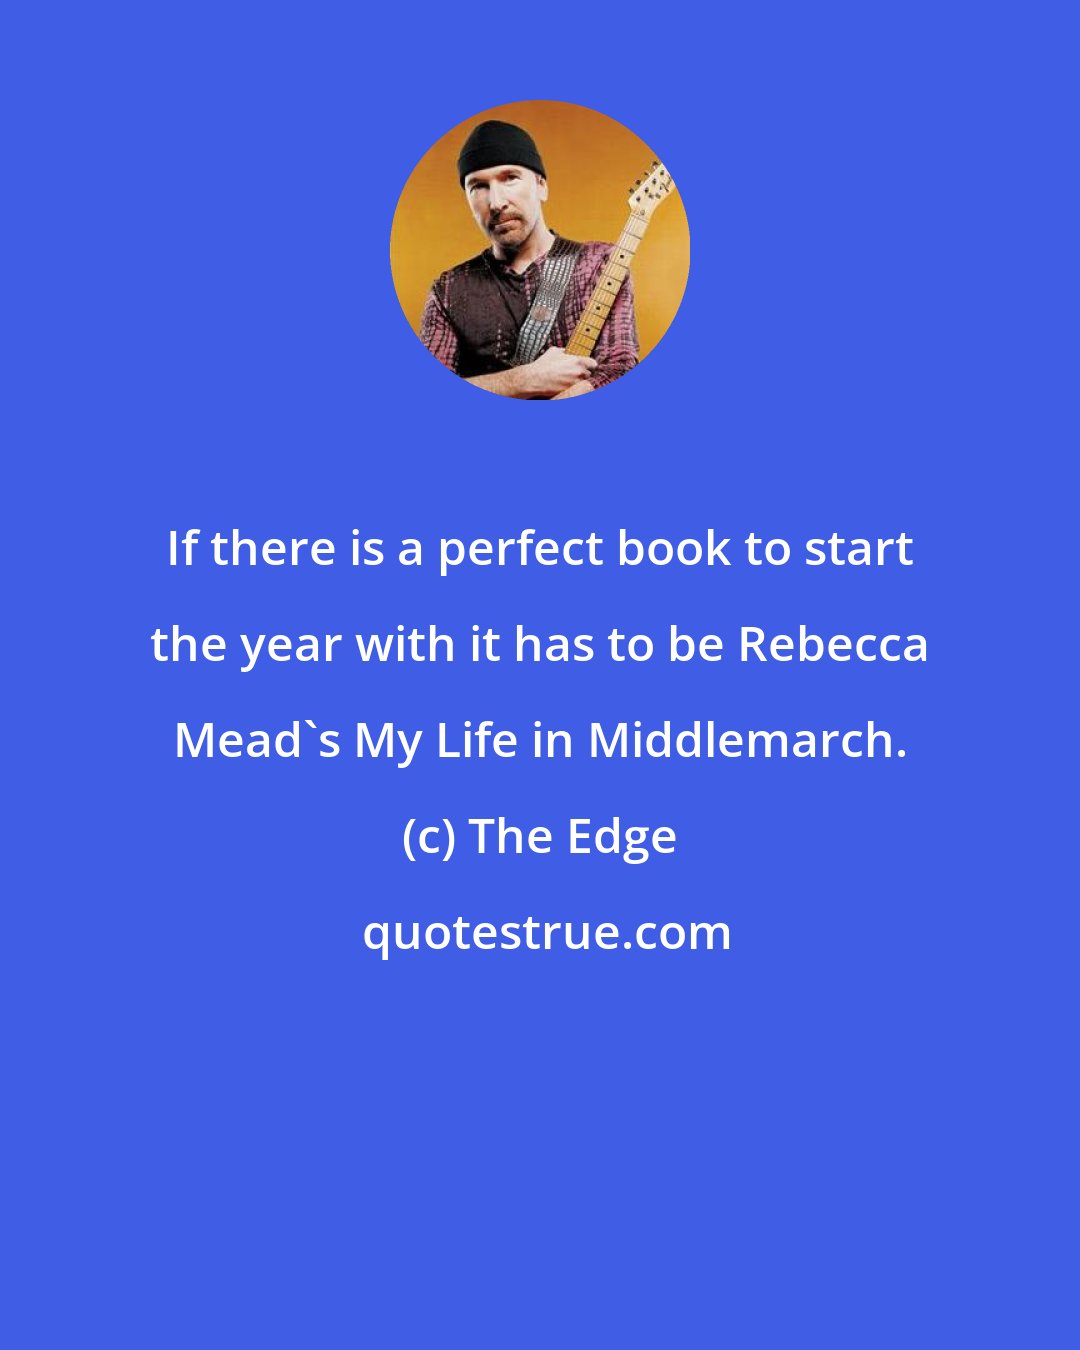 The Edge: If there is a perfect book to start the year with it has to be Rebecca Mead's My Life in Middlemarch.